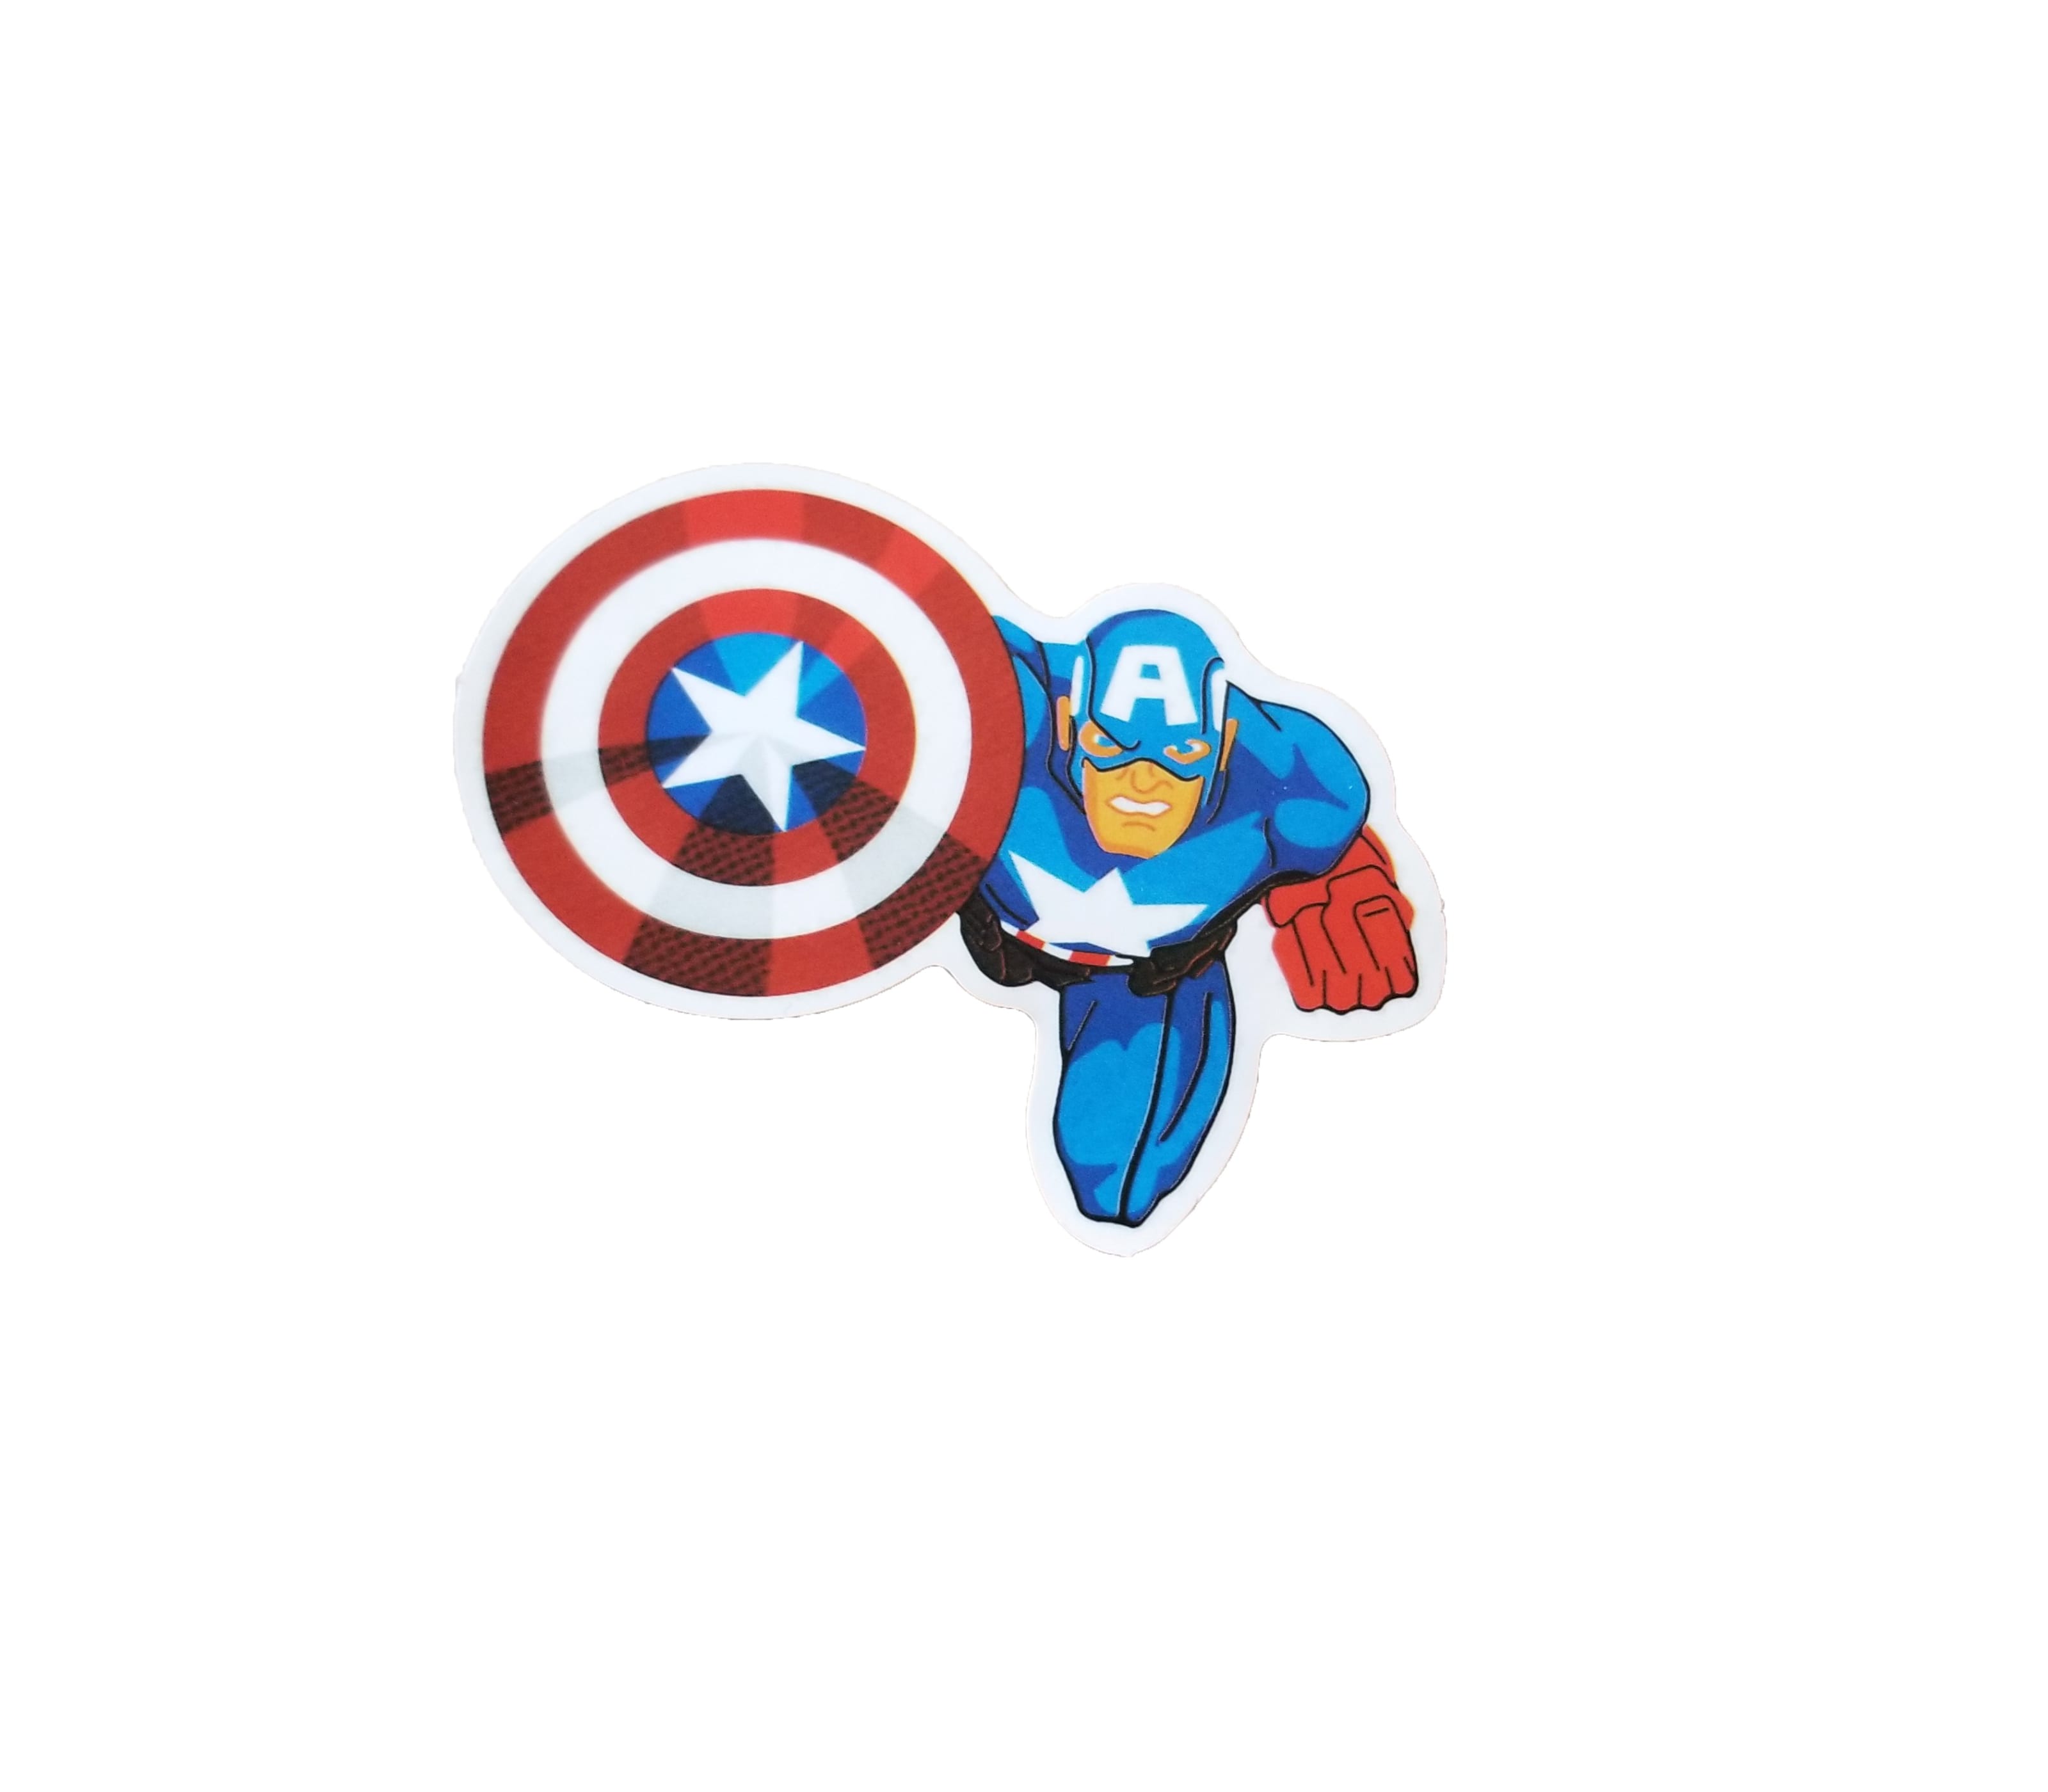 captain america read to attack. Has shield in one hand and fist in the other.